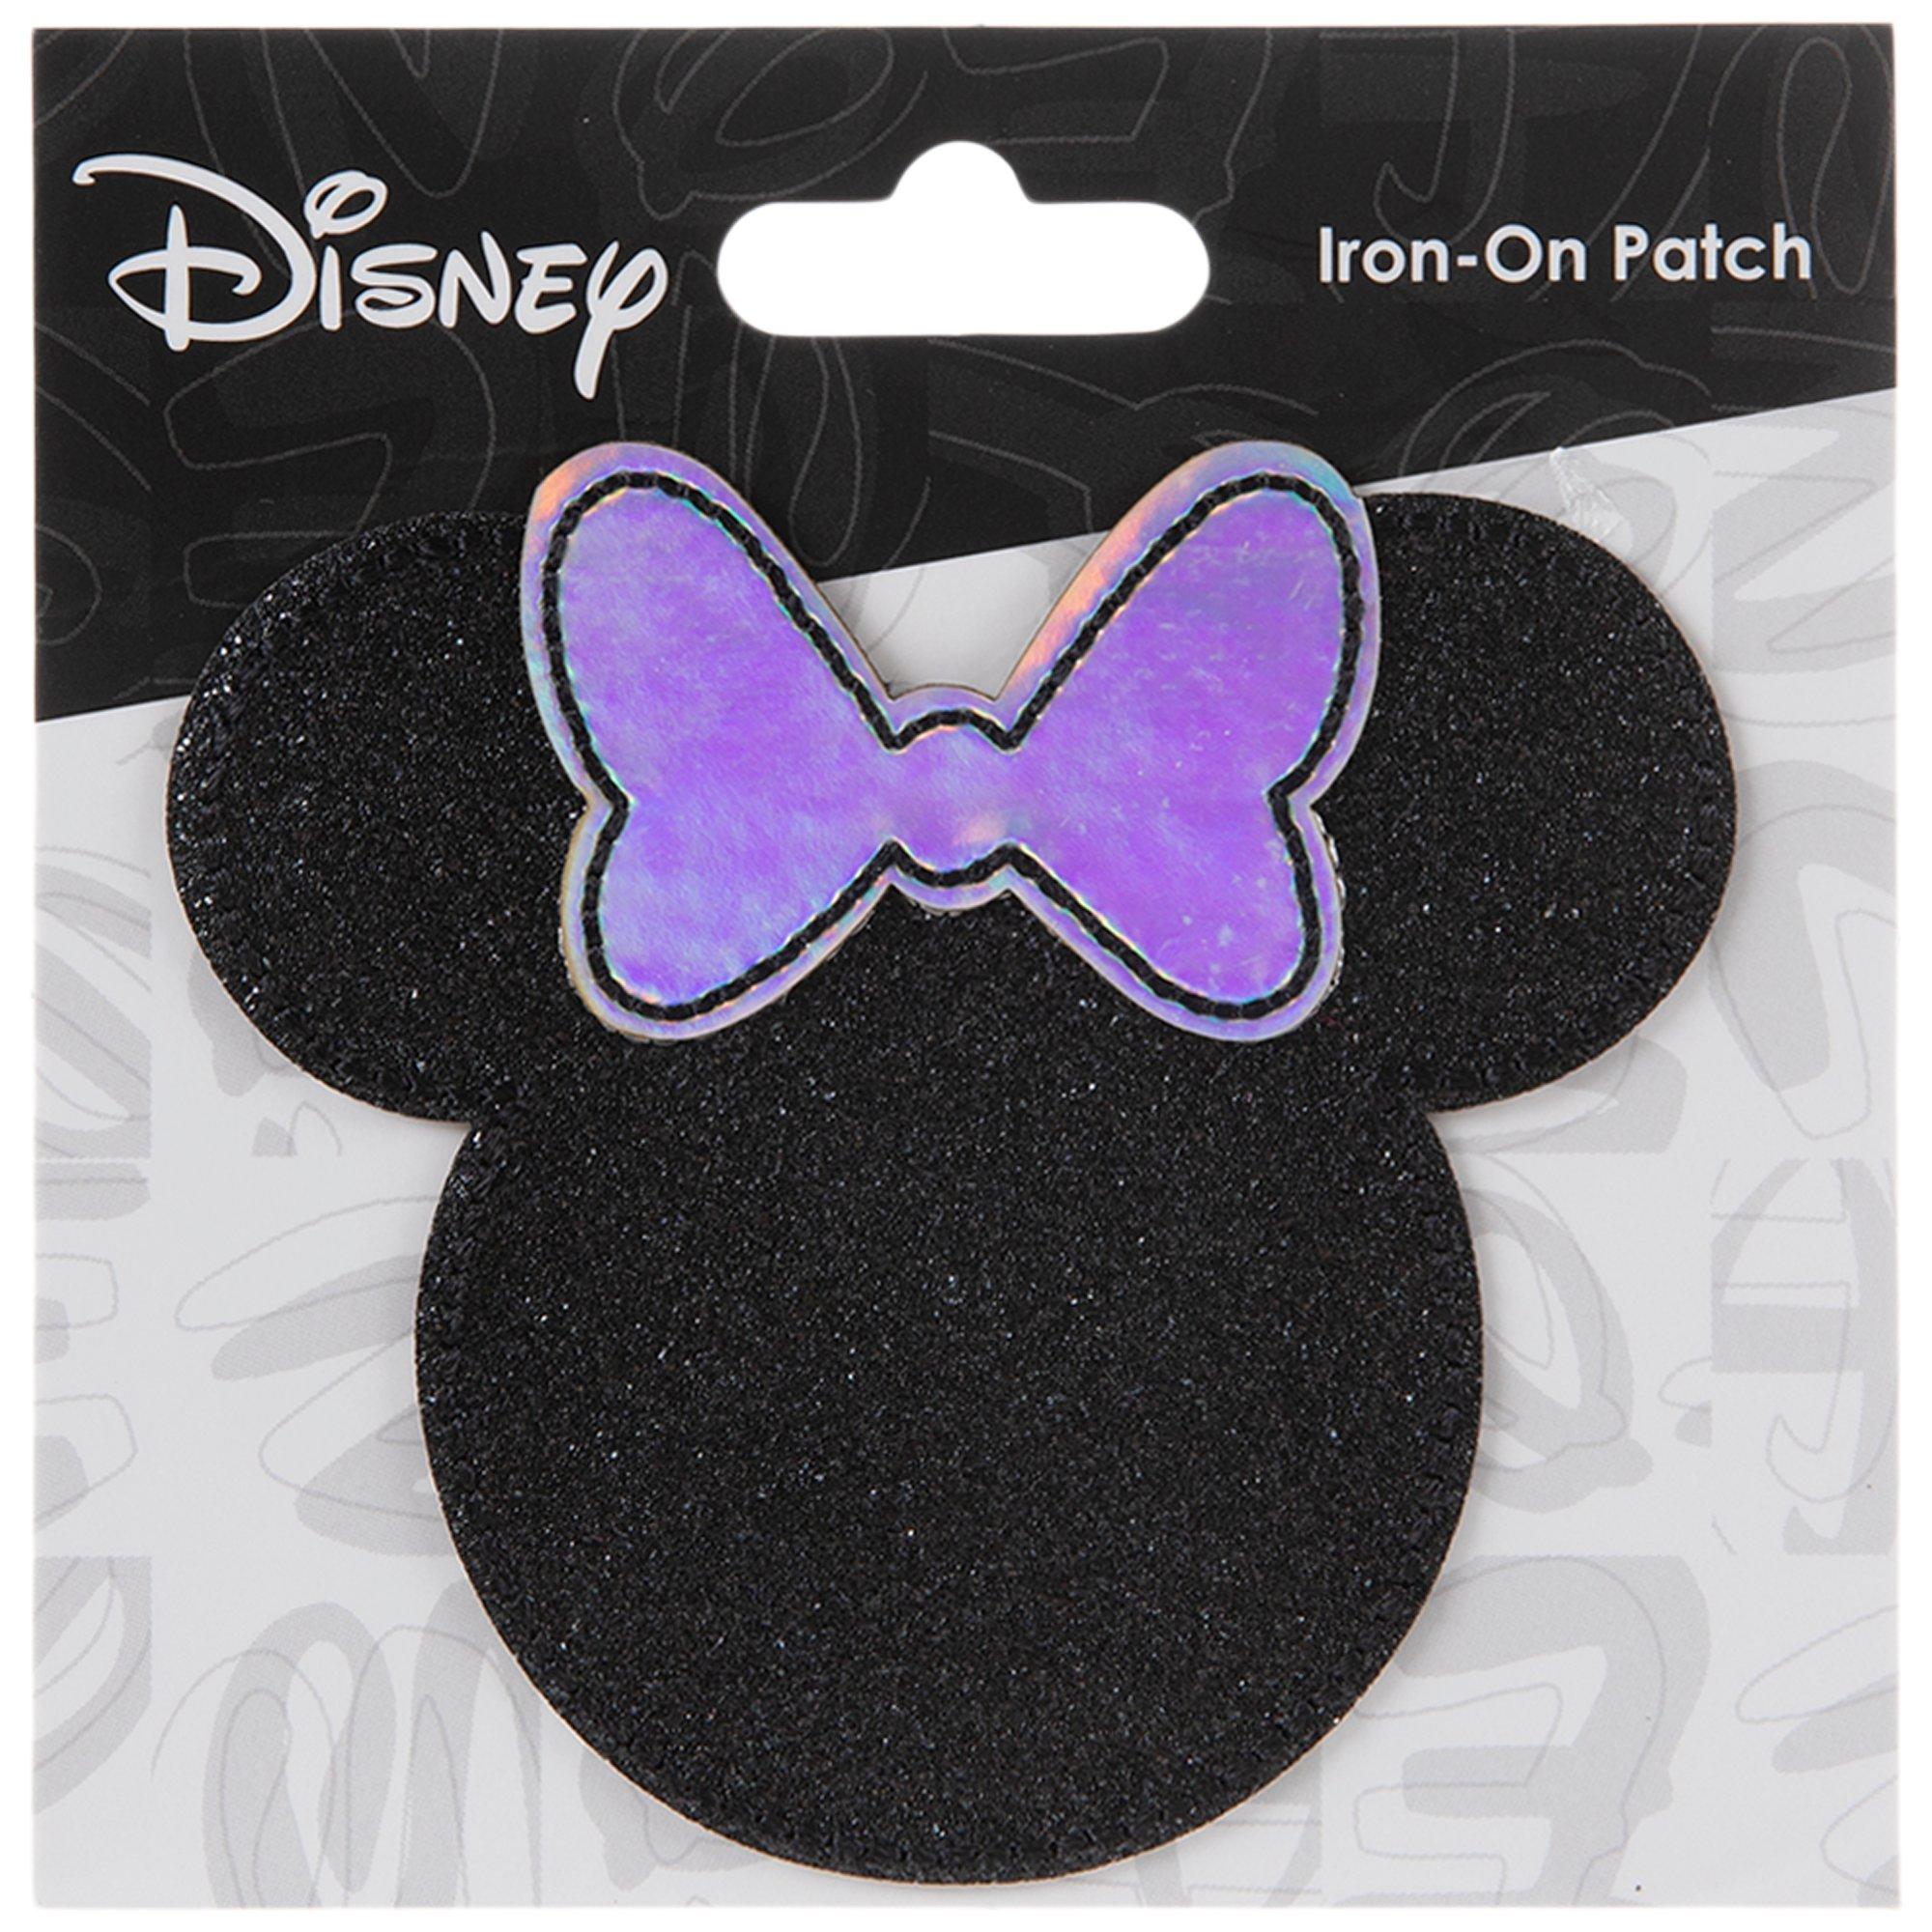 Minnie Mouse iron patch - Redstring B2B